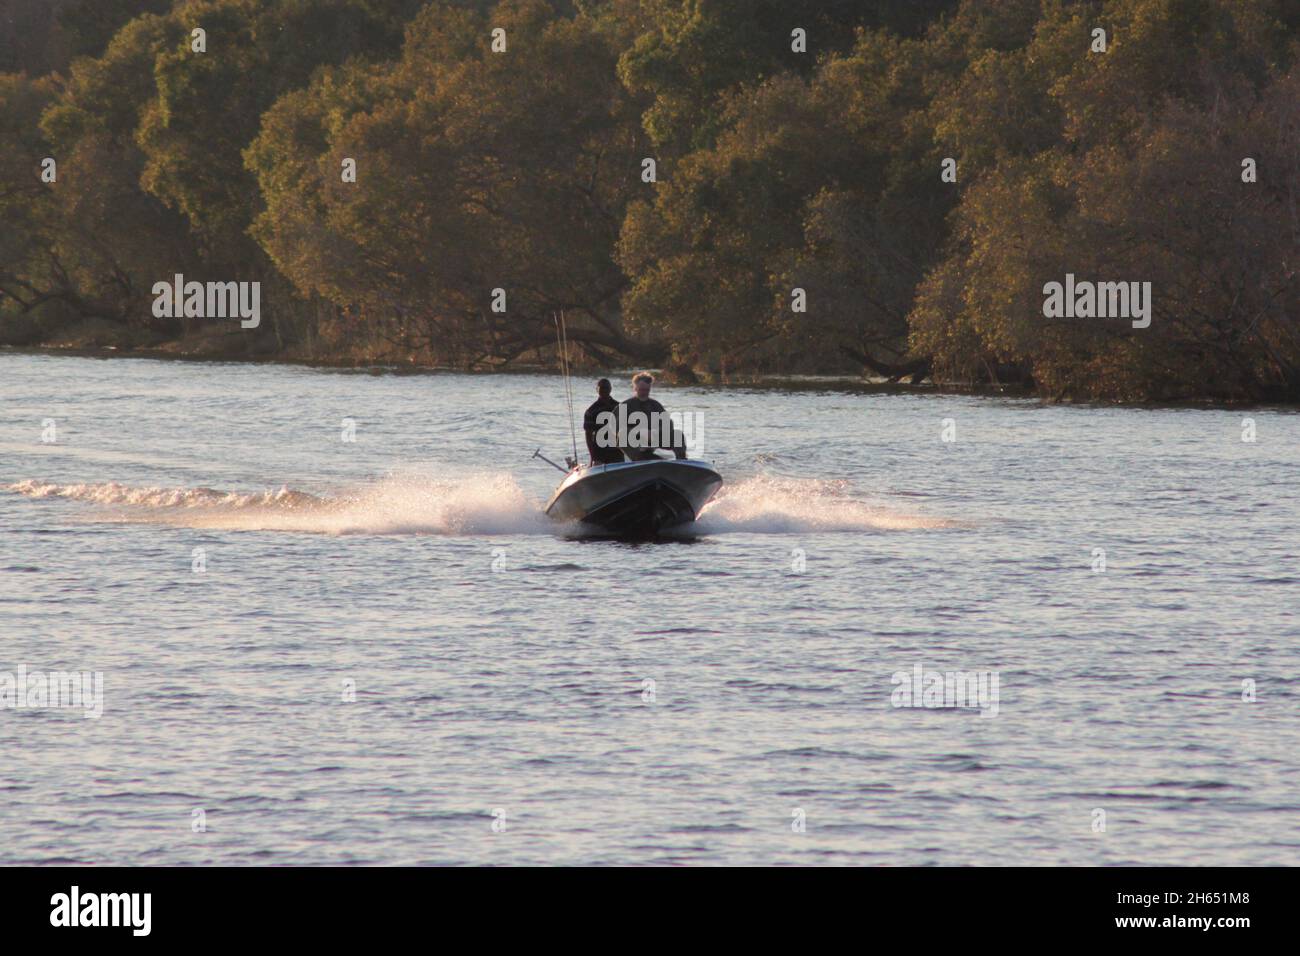 A speedboat is seen cruising on the Zambezi river inVictoria Falls. Water sports are popular in the resort town. Zimbabwe. Stock Photo